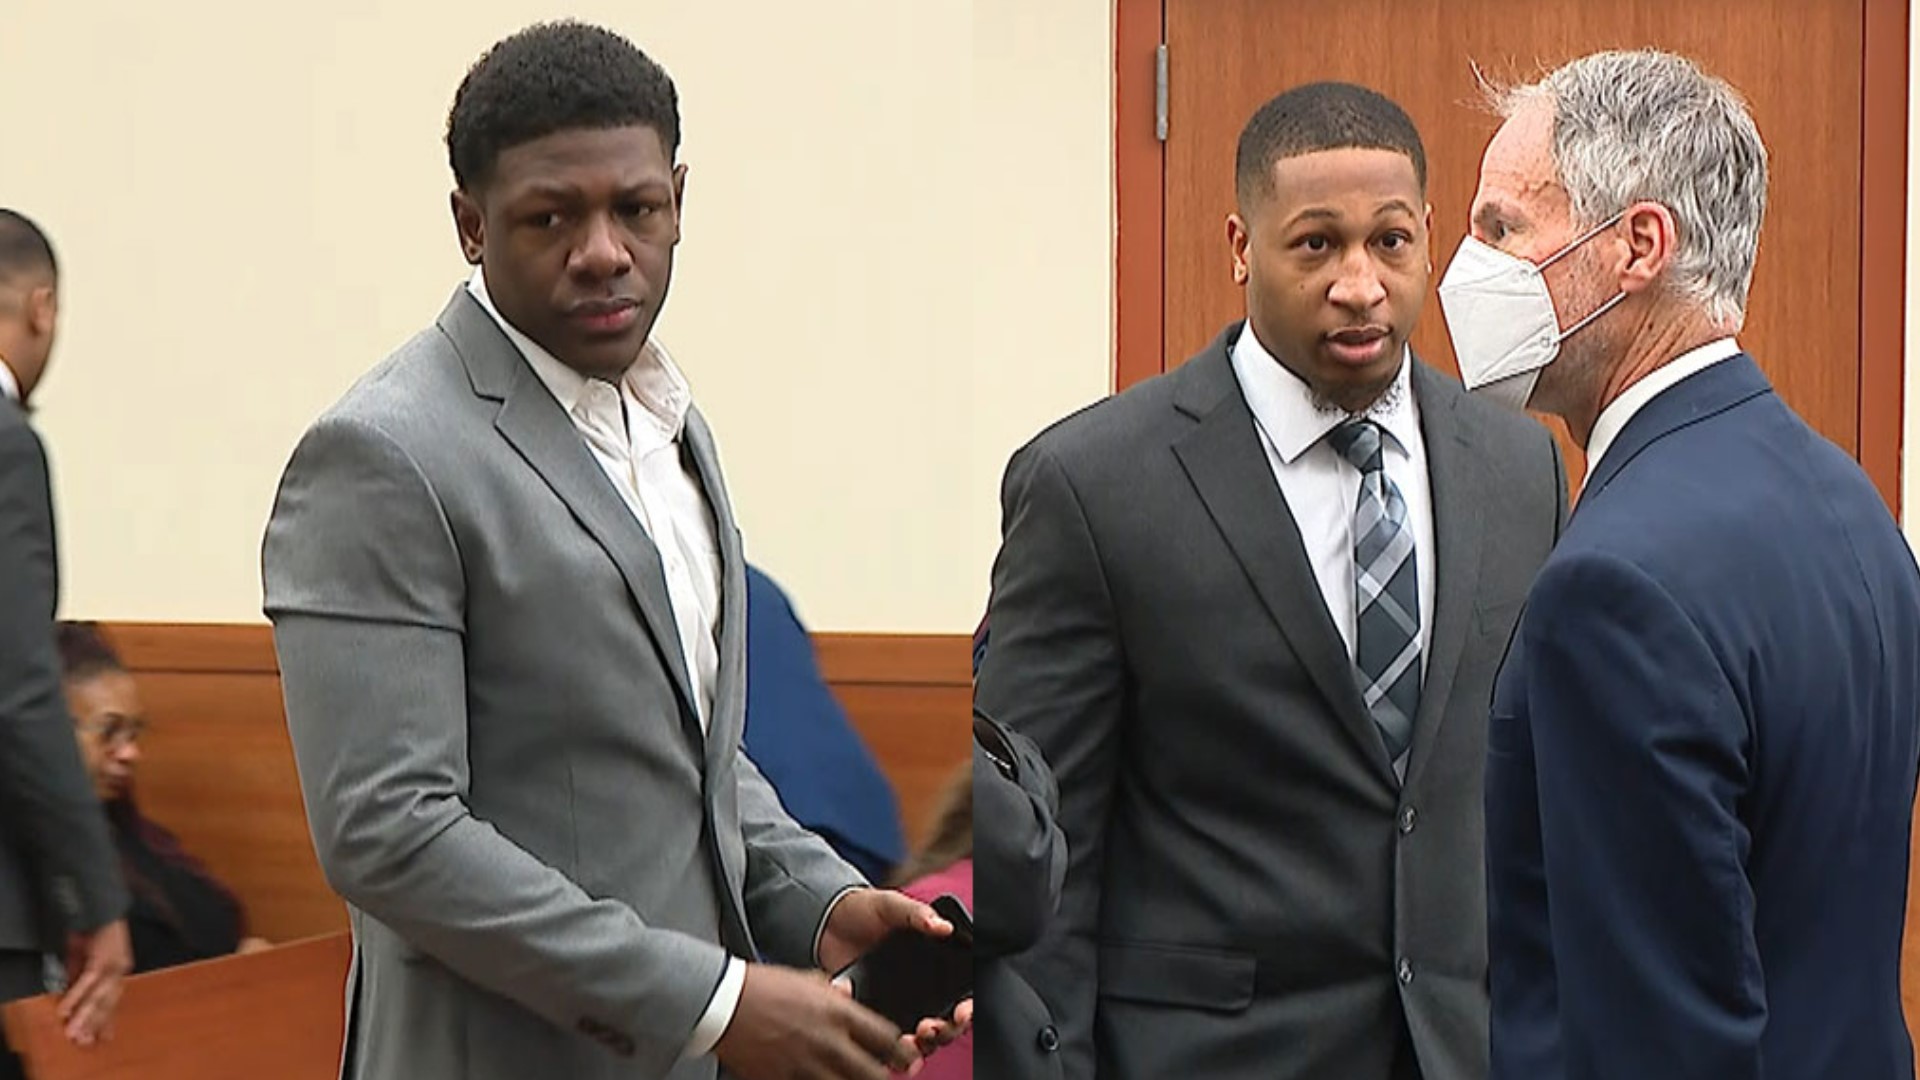 Fomer Ohio State Football players found not guilty | 10tv.com